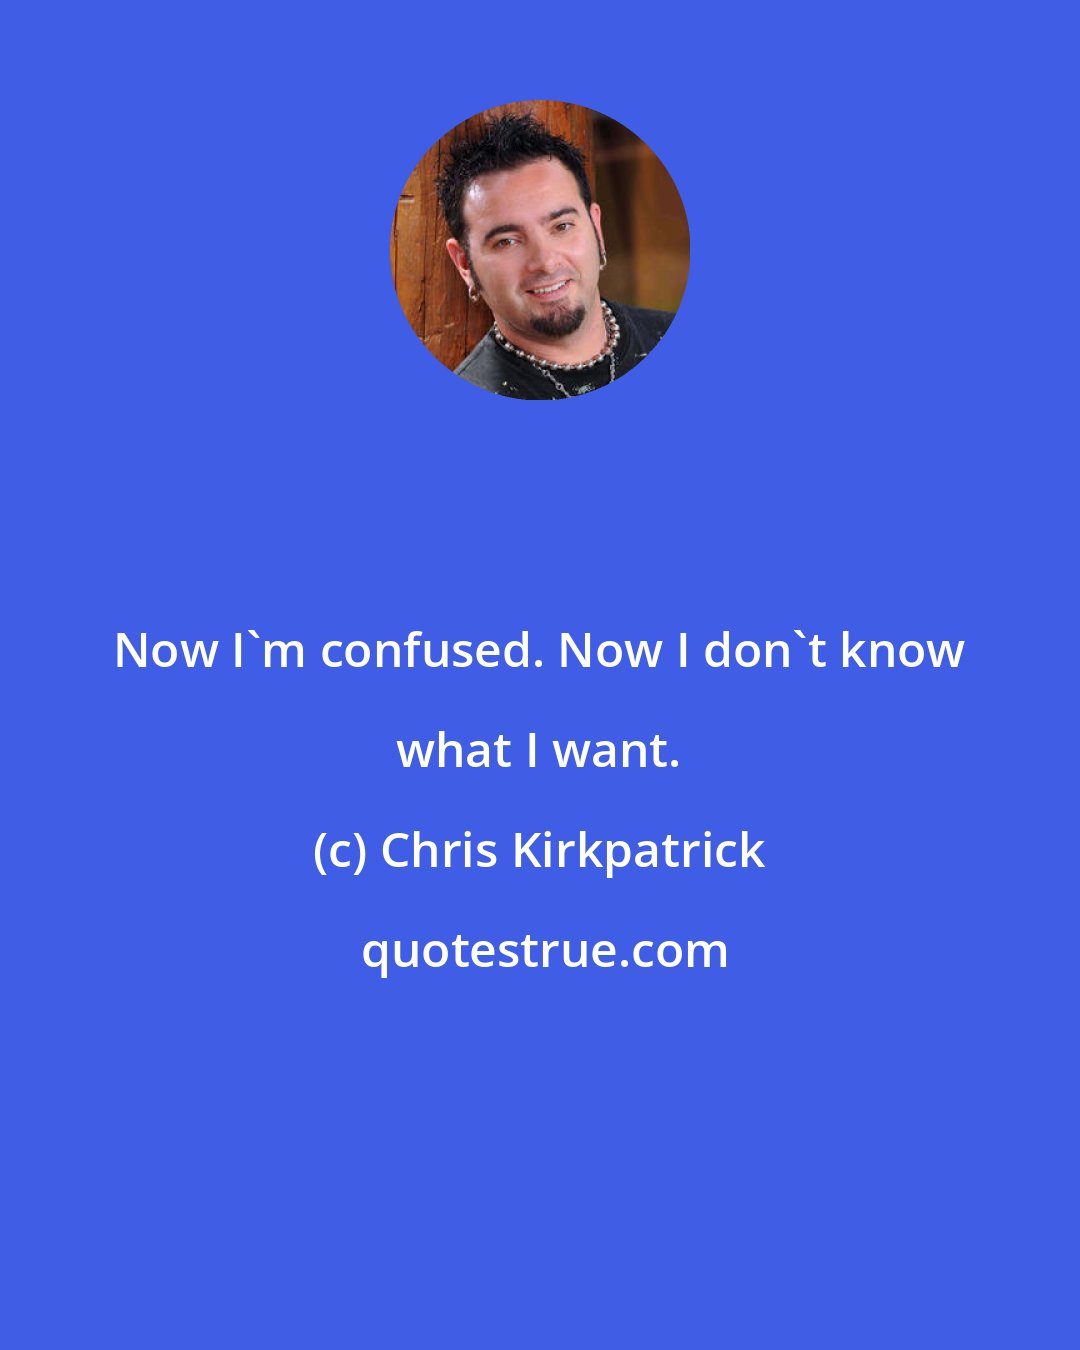 Chris Kirkpatrick: Now I'm confused. Now I don't know what I want.